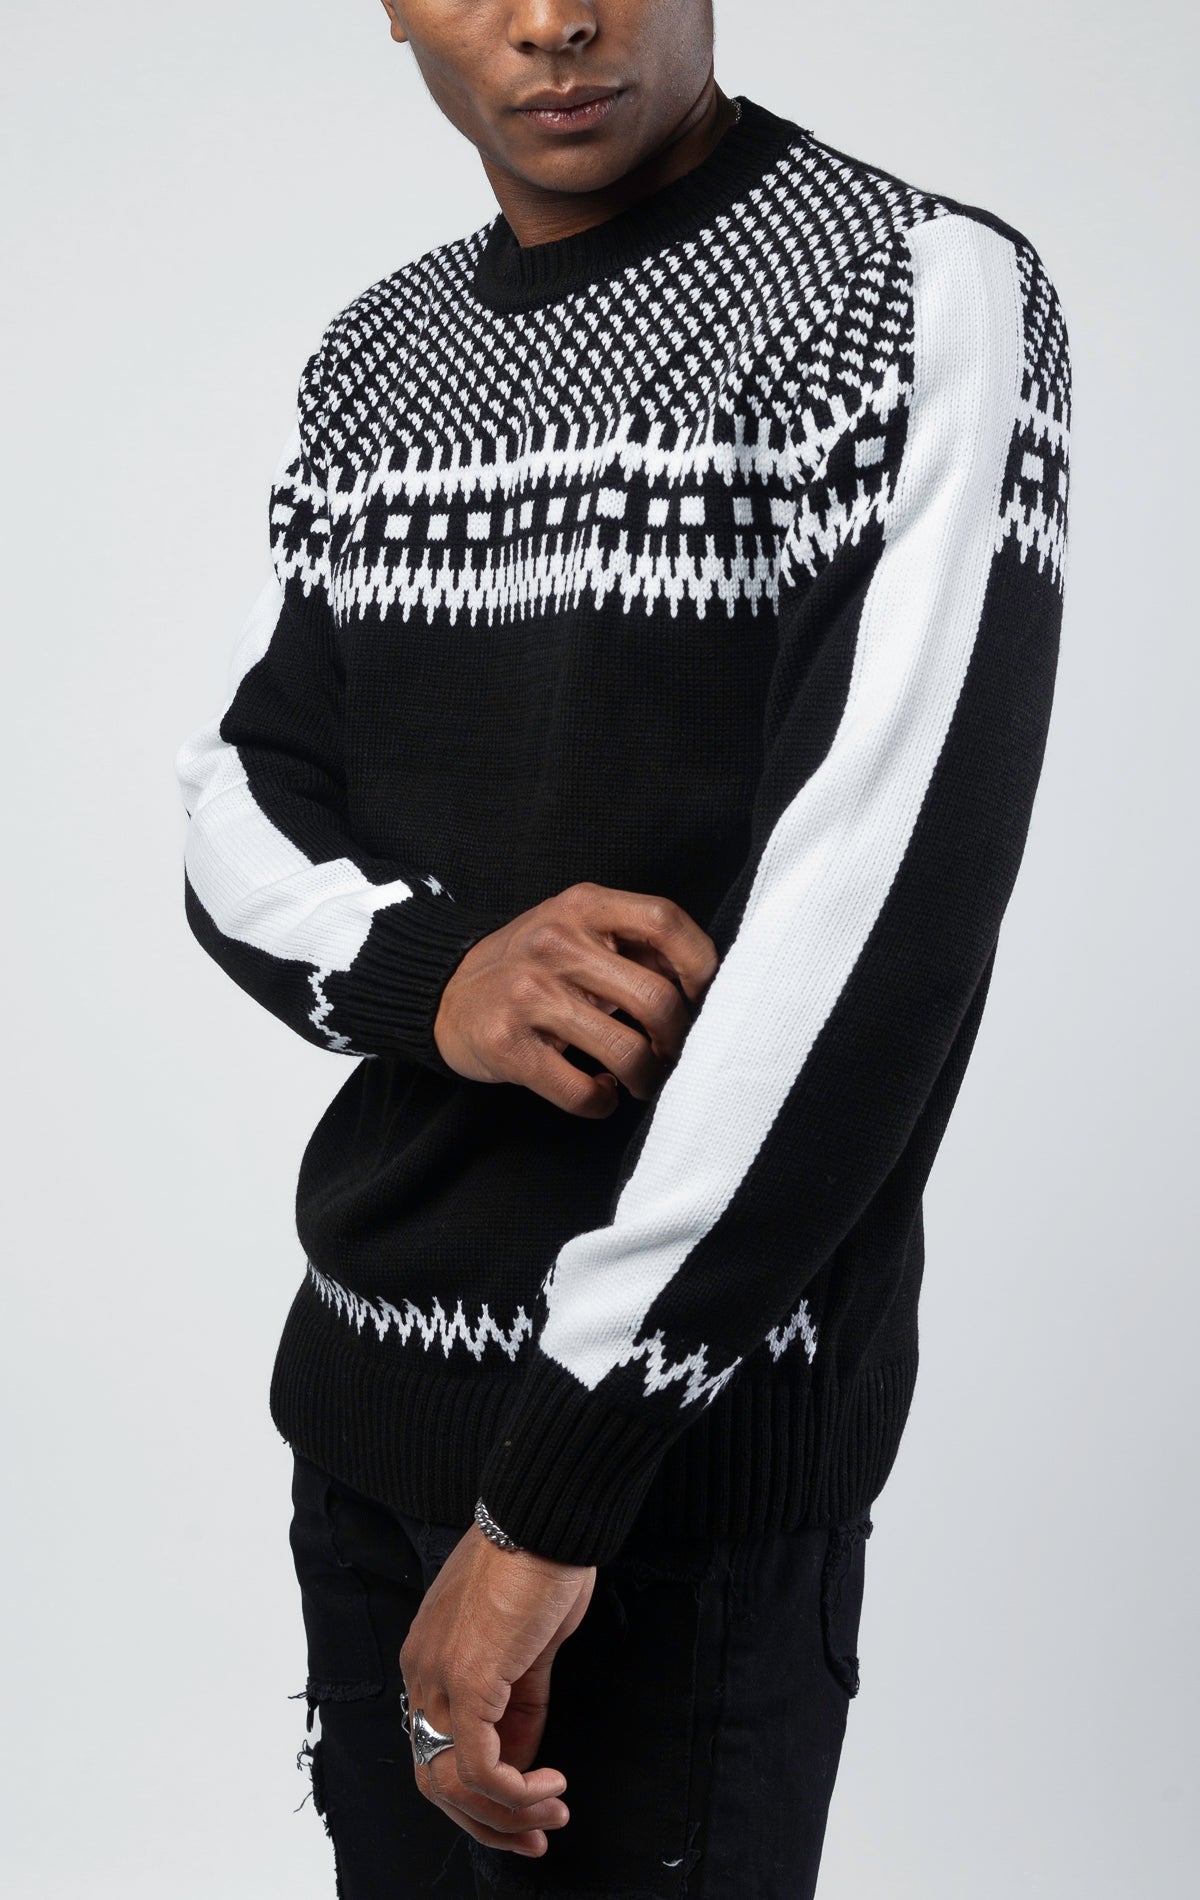 A black and white luxurious sweater with classic knit patterns